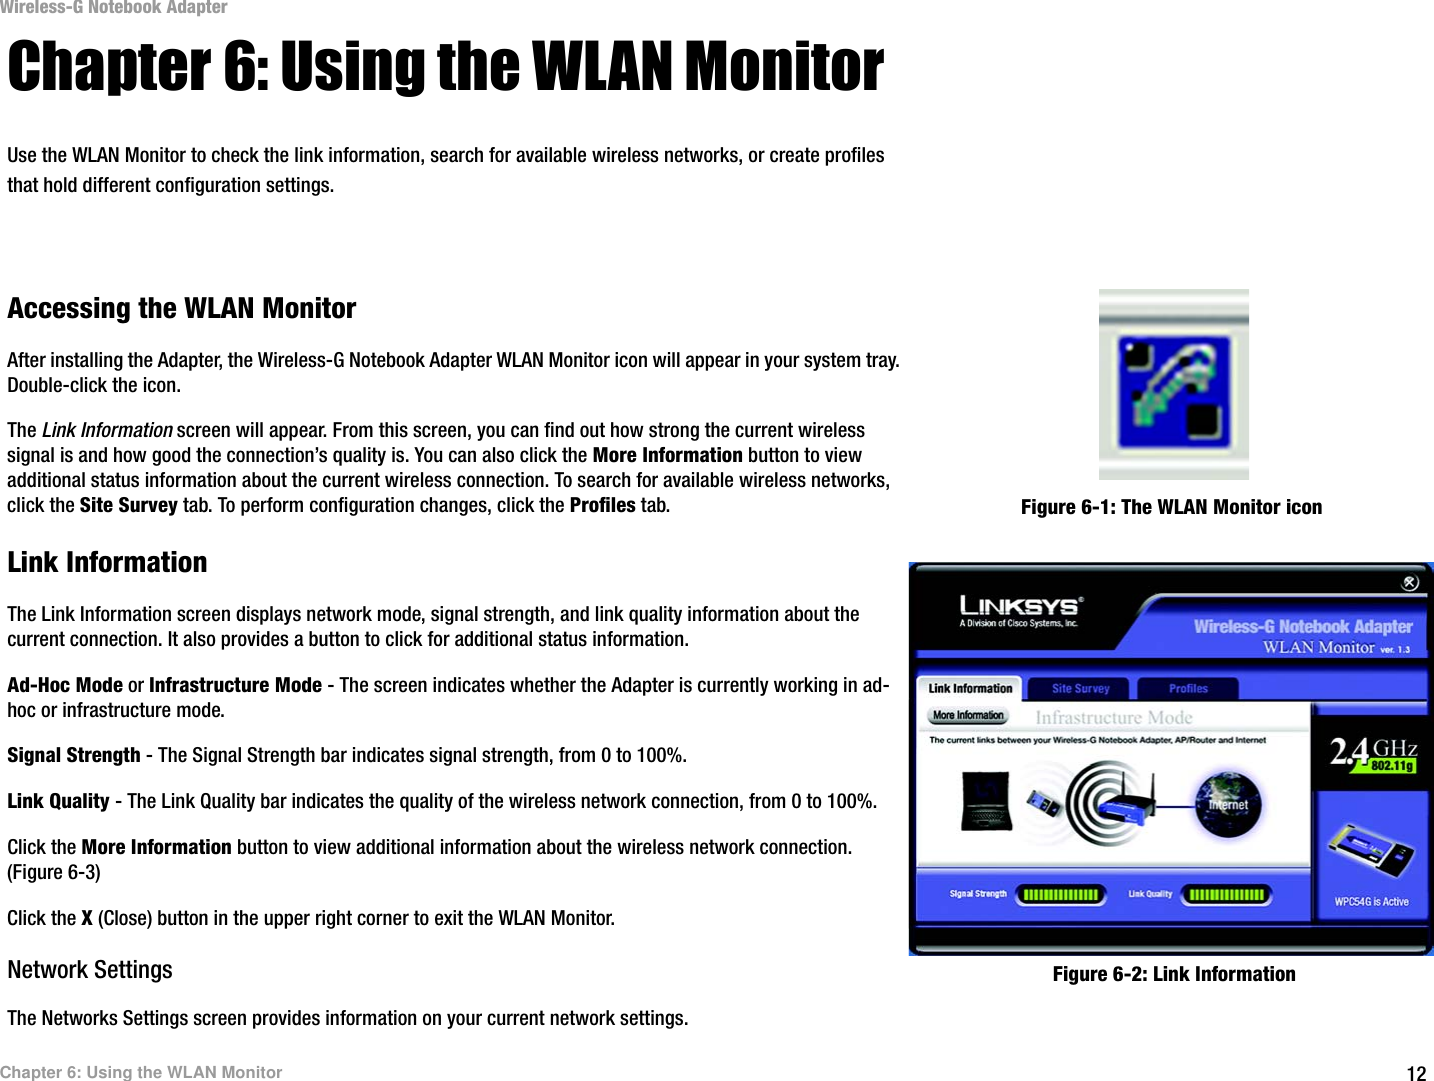 12Chapter 6: Using the WLAN MonitorWireless-G Notebook AdapterChapter 6: Using the WLAN MonitorUse the WLAN Monitor to check the link information, search for available wireless networks, or create profiles that hold different configuration settings.Accessing the WLAN MonitorAfter installing the Adapter, the Wireless-G Notebook Adapter WLAN Monitor icon will appear in your system tray.  Double-click the icon.The Link Information screen will appear. From this screen, you can find out how strong the current wireless signal is and how good the connection’s quality is. You can also click the More Information button to view additional status information about the current wireless connection. To search for available wireless networks, click the Site Survey tab. To perform configuration changes, click the Profiles tab.Link InformationThe Link Information screen displays network mode, signal strength, and link quality information about the current connection. It also provides a button to click for additional status information.  Ad-Hoc Mode or Infrastructure Mode - The screen indicates whether the Adapter is currently working in ad-hoc or infrastructure mode.Signal Strength - The Signal Strength bar indicates signal strength, from 0 to 100%. Link Quality - The Link Quality bar indicates the quality of the wireless network connection, from 0 to 100%.Click the More Information button to view additional information about the wireless network connection. (Figure 6-3) Click the X (Close) button in the upper right corner to exit the WLAN Monitor.Network SettingsThe Networks Settings screen provides information on your current network settings. Figure 6-1: The WLAN Monitor iconFigure 6-2: Link Information